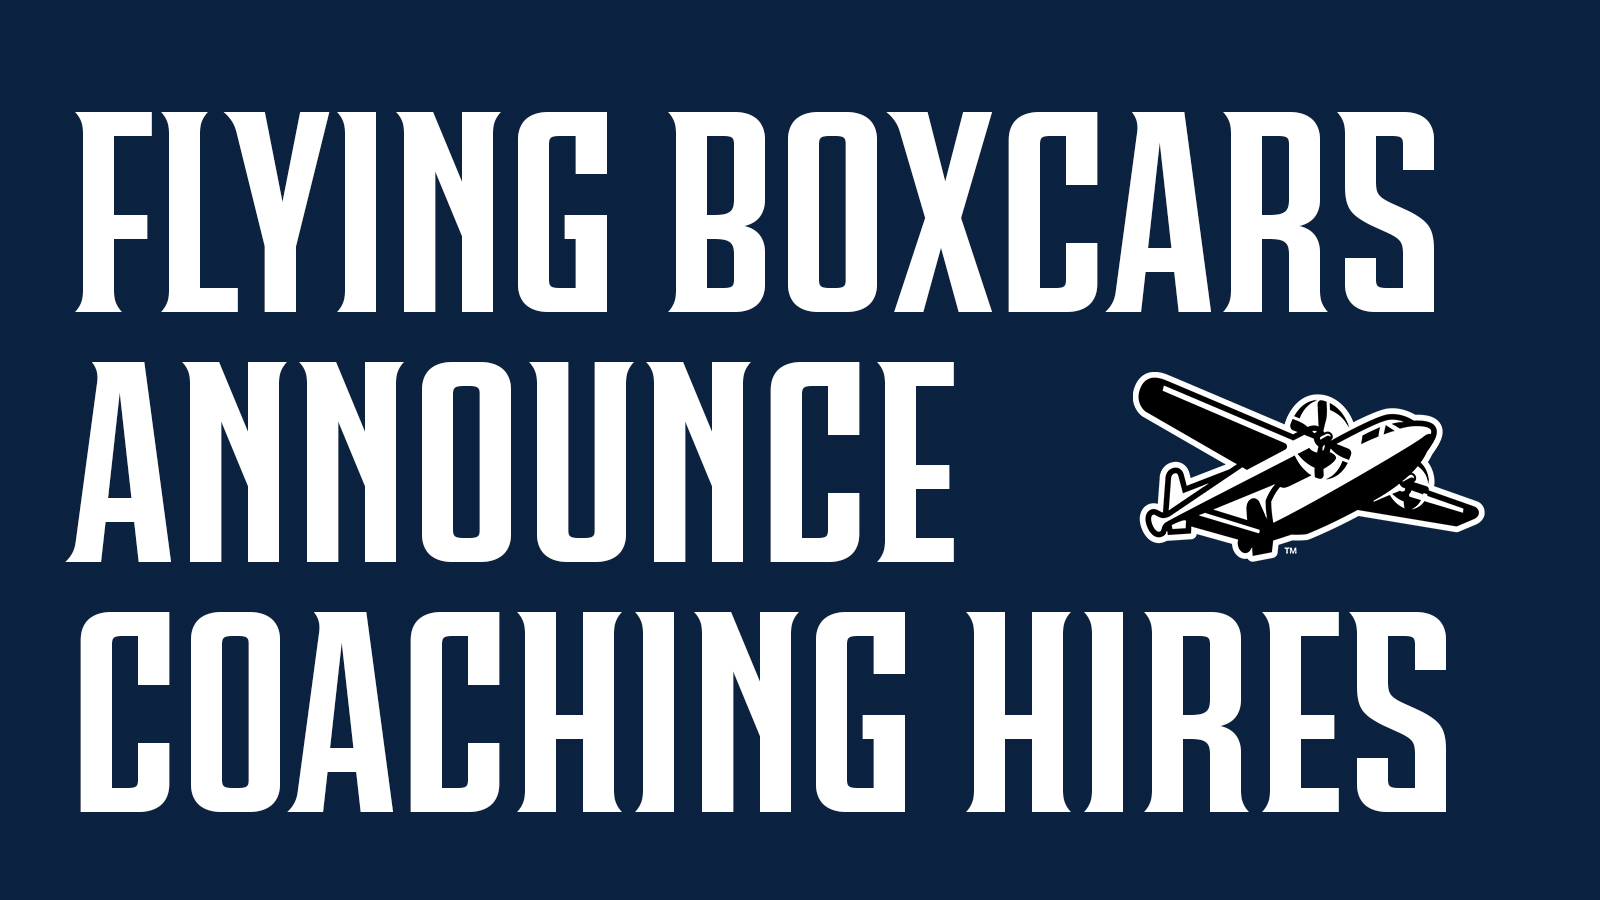 Flying Boxcars Announce Coaching Hires